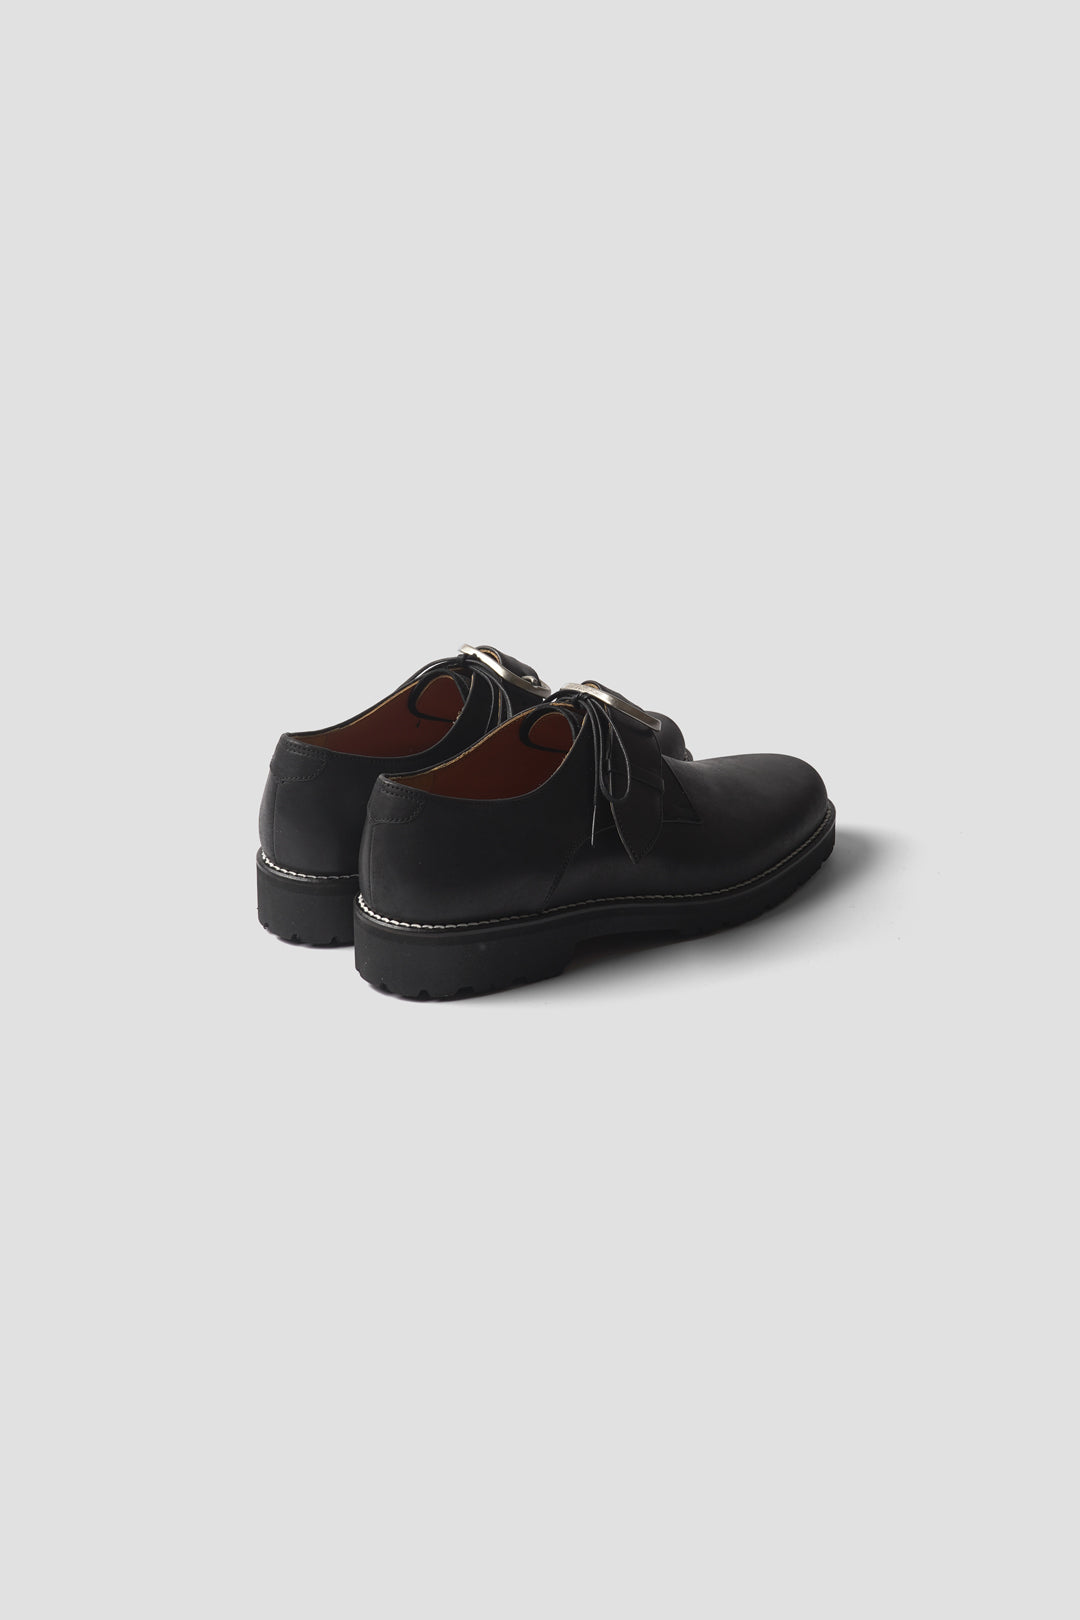 "BUCKLE SHOES" TMTKS-S-0038  BLACK LEATHER